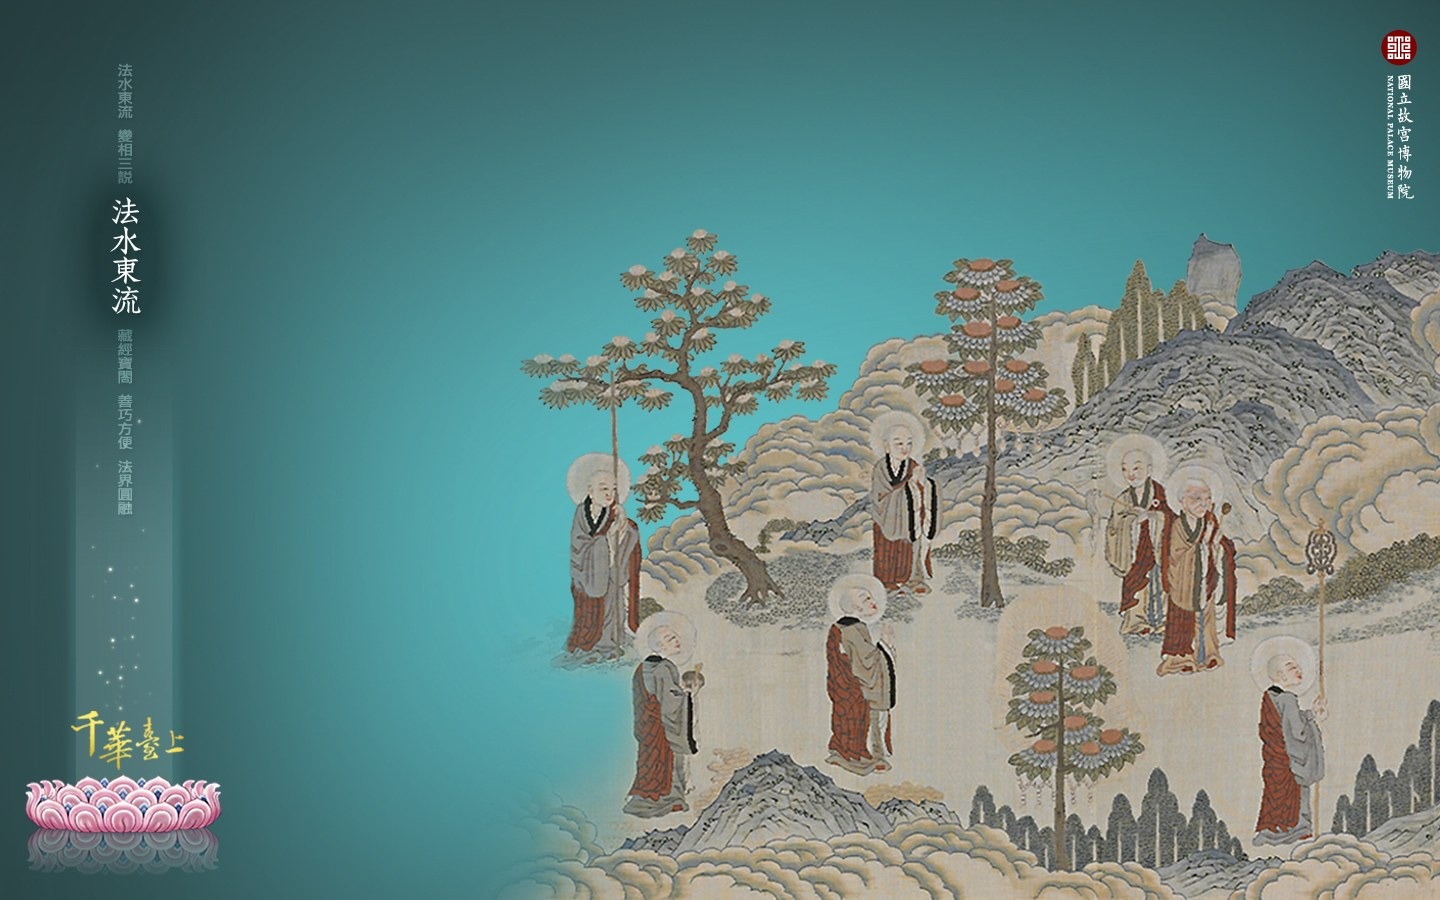 National Palace Museum exhibition wallpaper (3) #4 - 1440x900